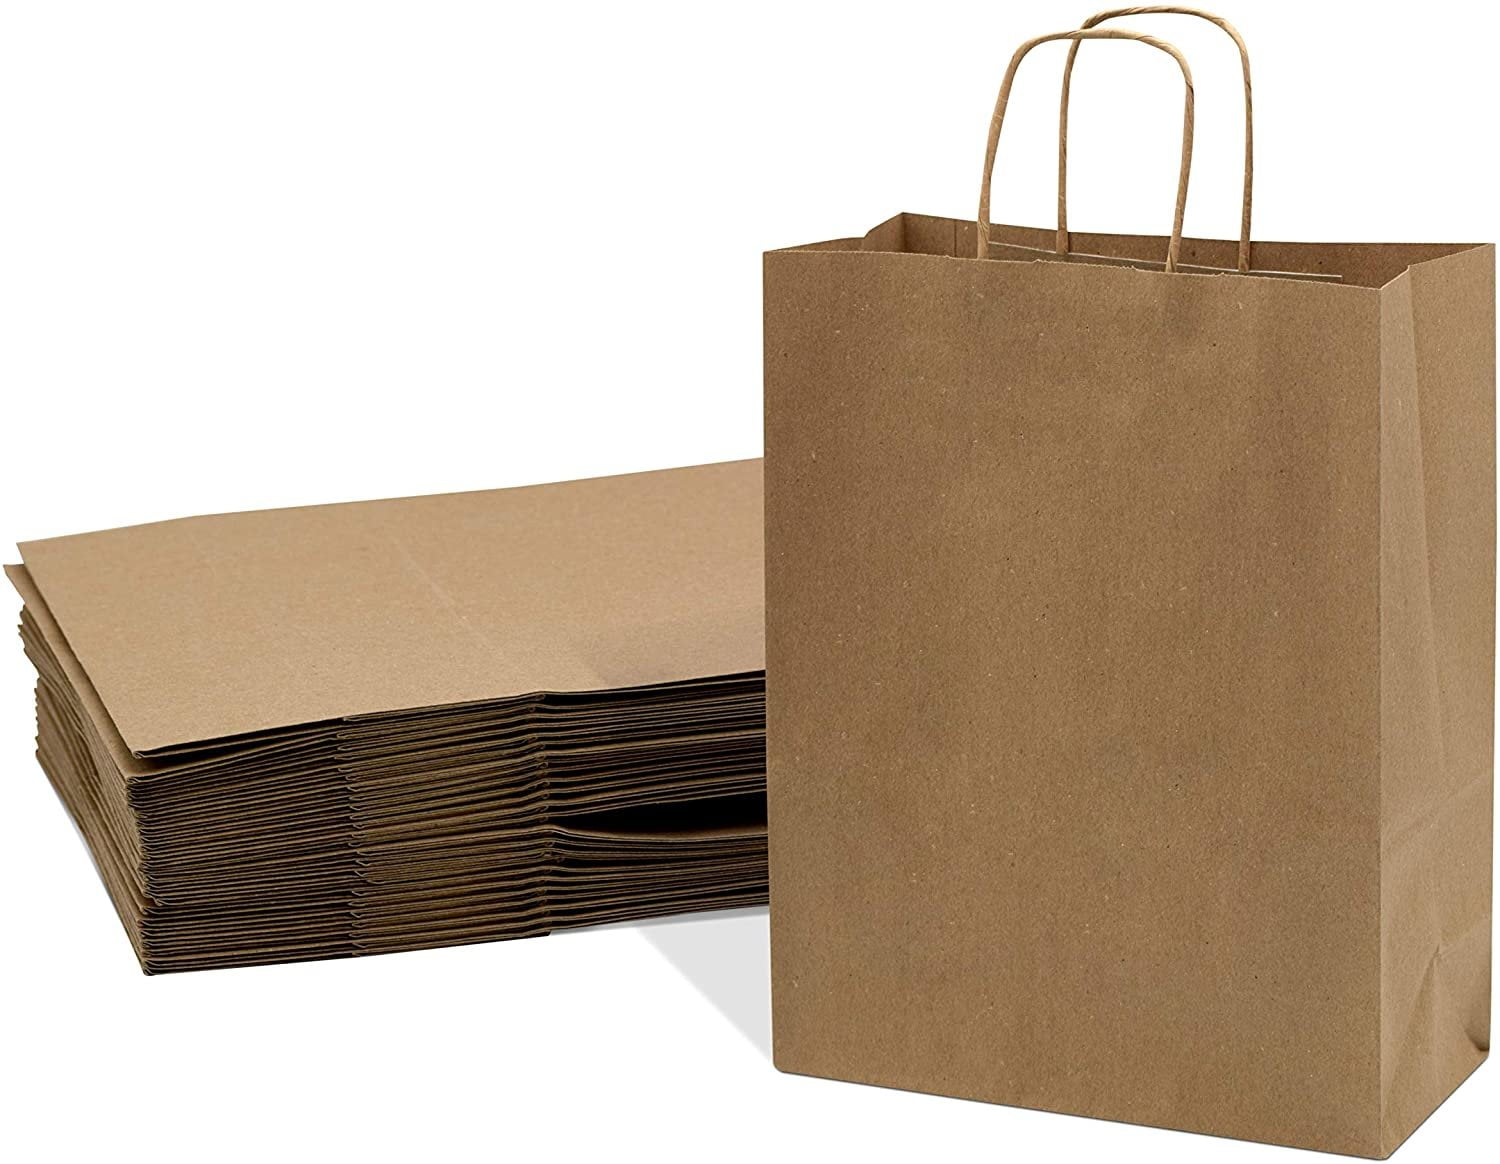 8"x4.25"x10.5" Kraft Paper Bags Gift Bag with Handles for Wedding Party Shopping 